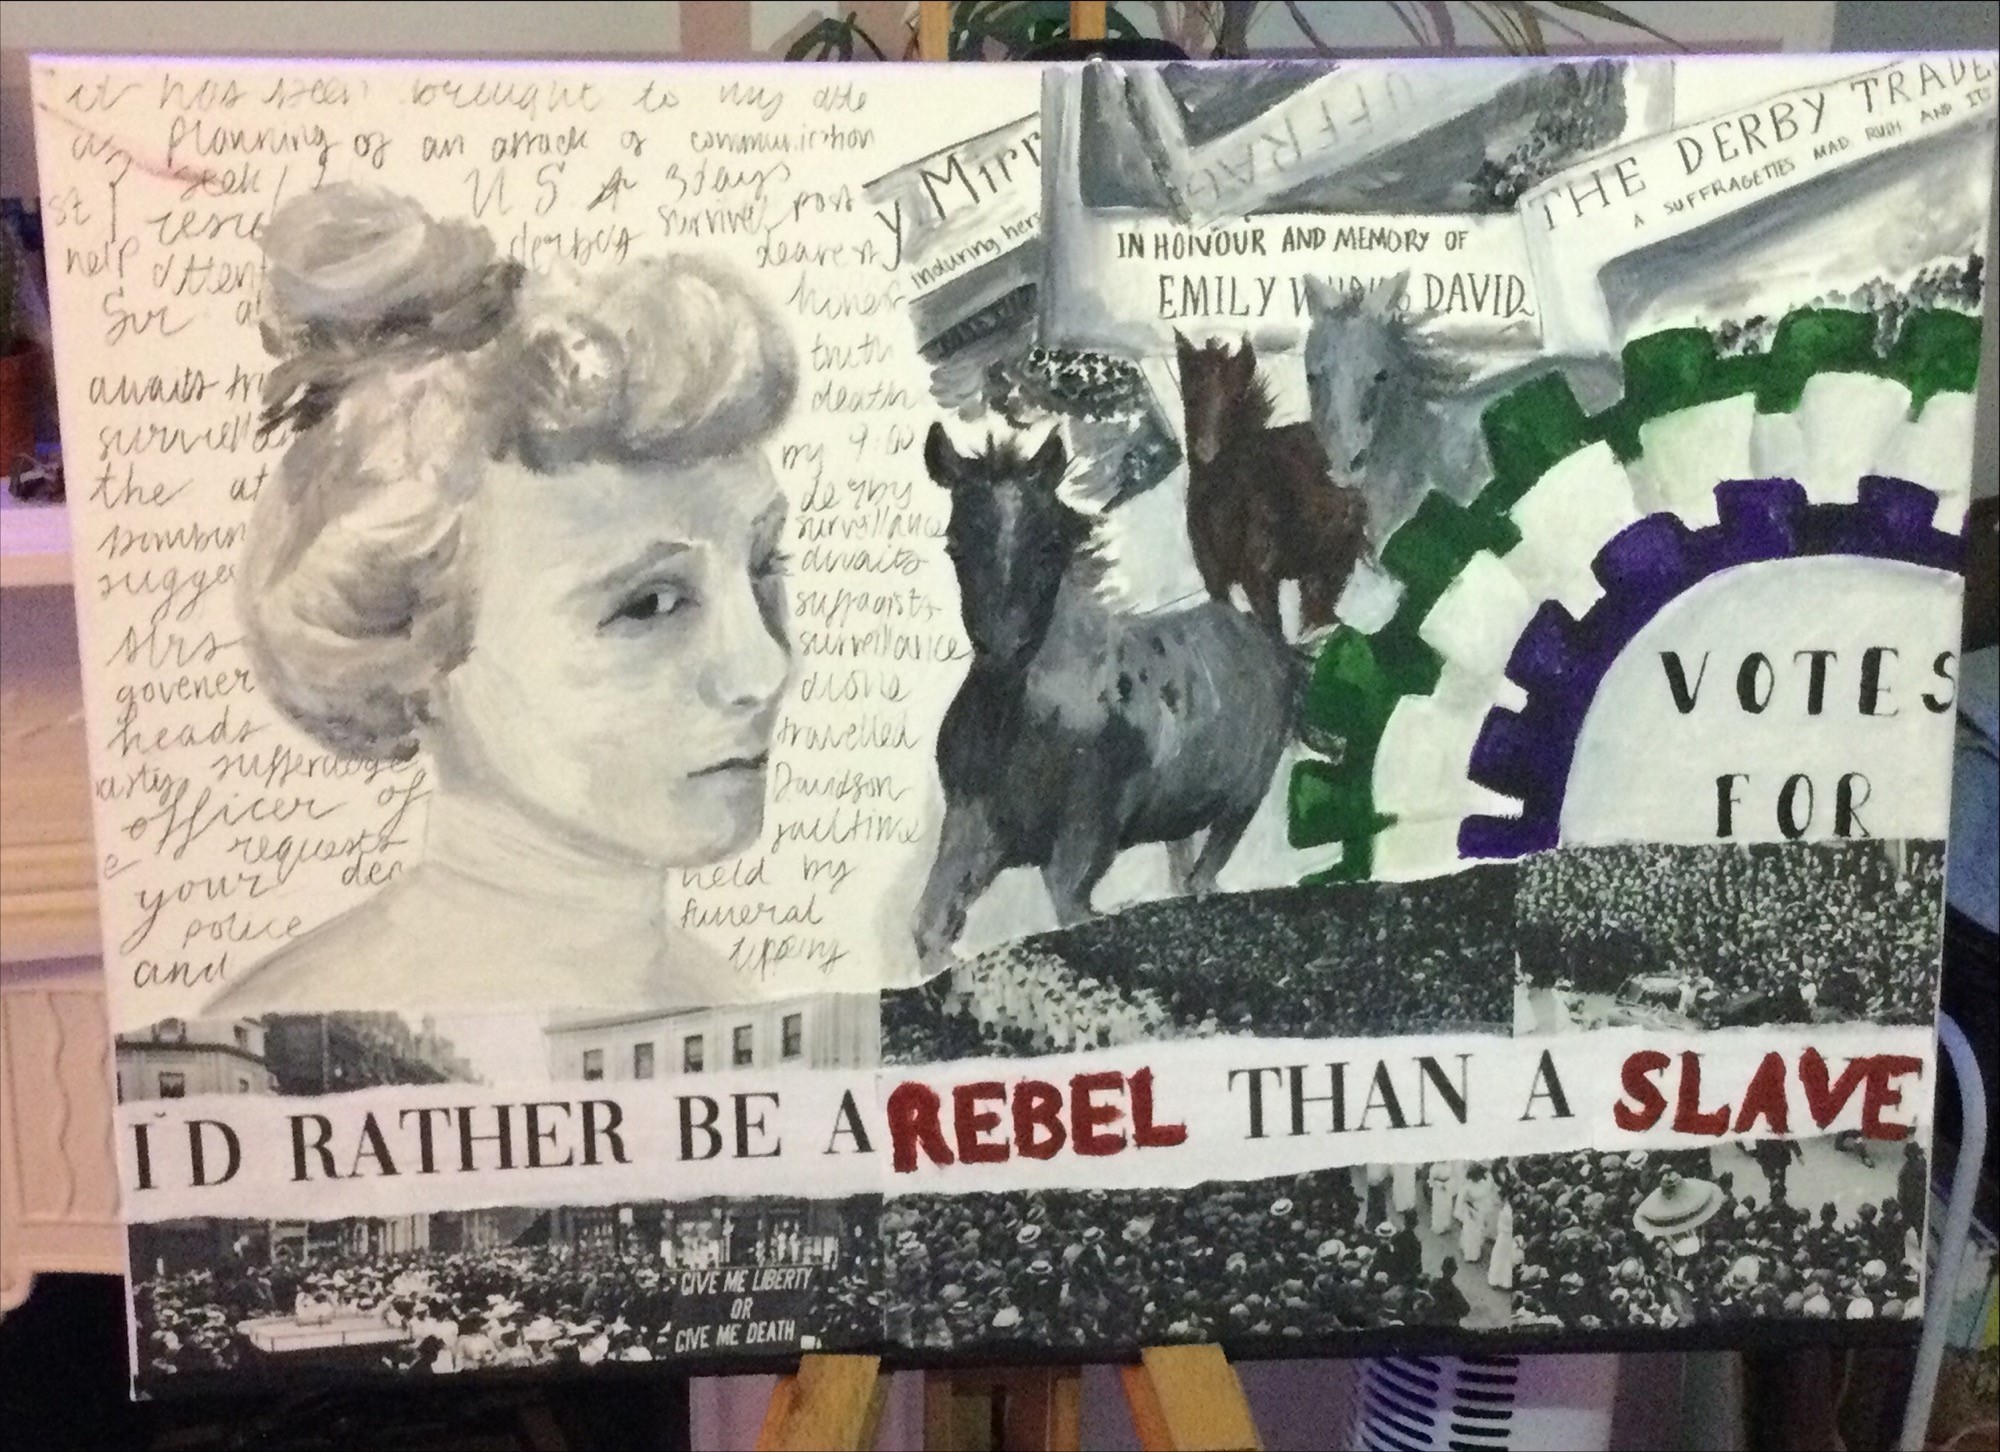 Painting of a women's face next to horses, a suffragette rosette, and the words 'I'm rather be a rebel than a slave'.